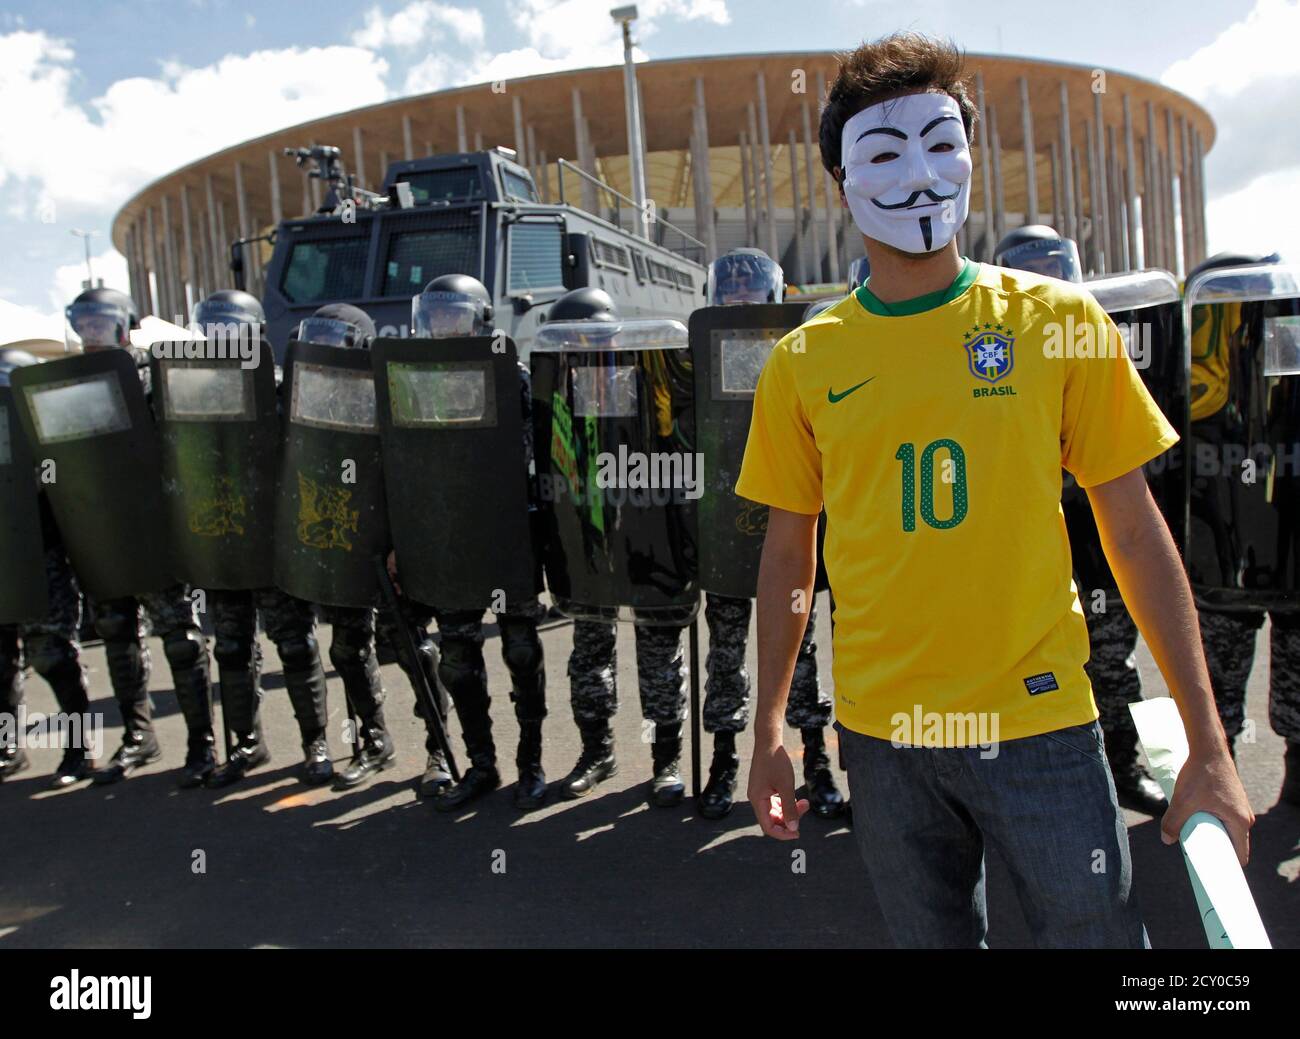 An activist demonstrates in front of riot police outside the Mane Garrincha  National Stadium in Brasilia June 15, 2013. Protests continued in Brasilia  over the government's economic policies and the hosting of